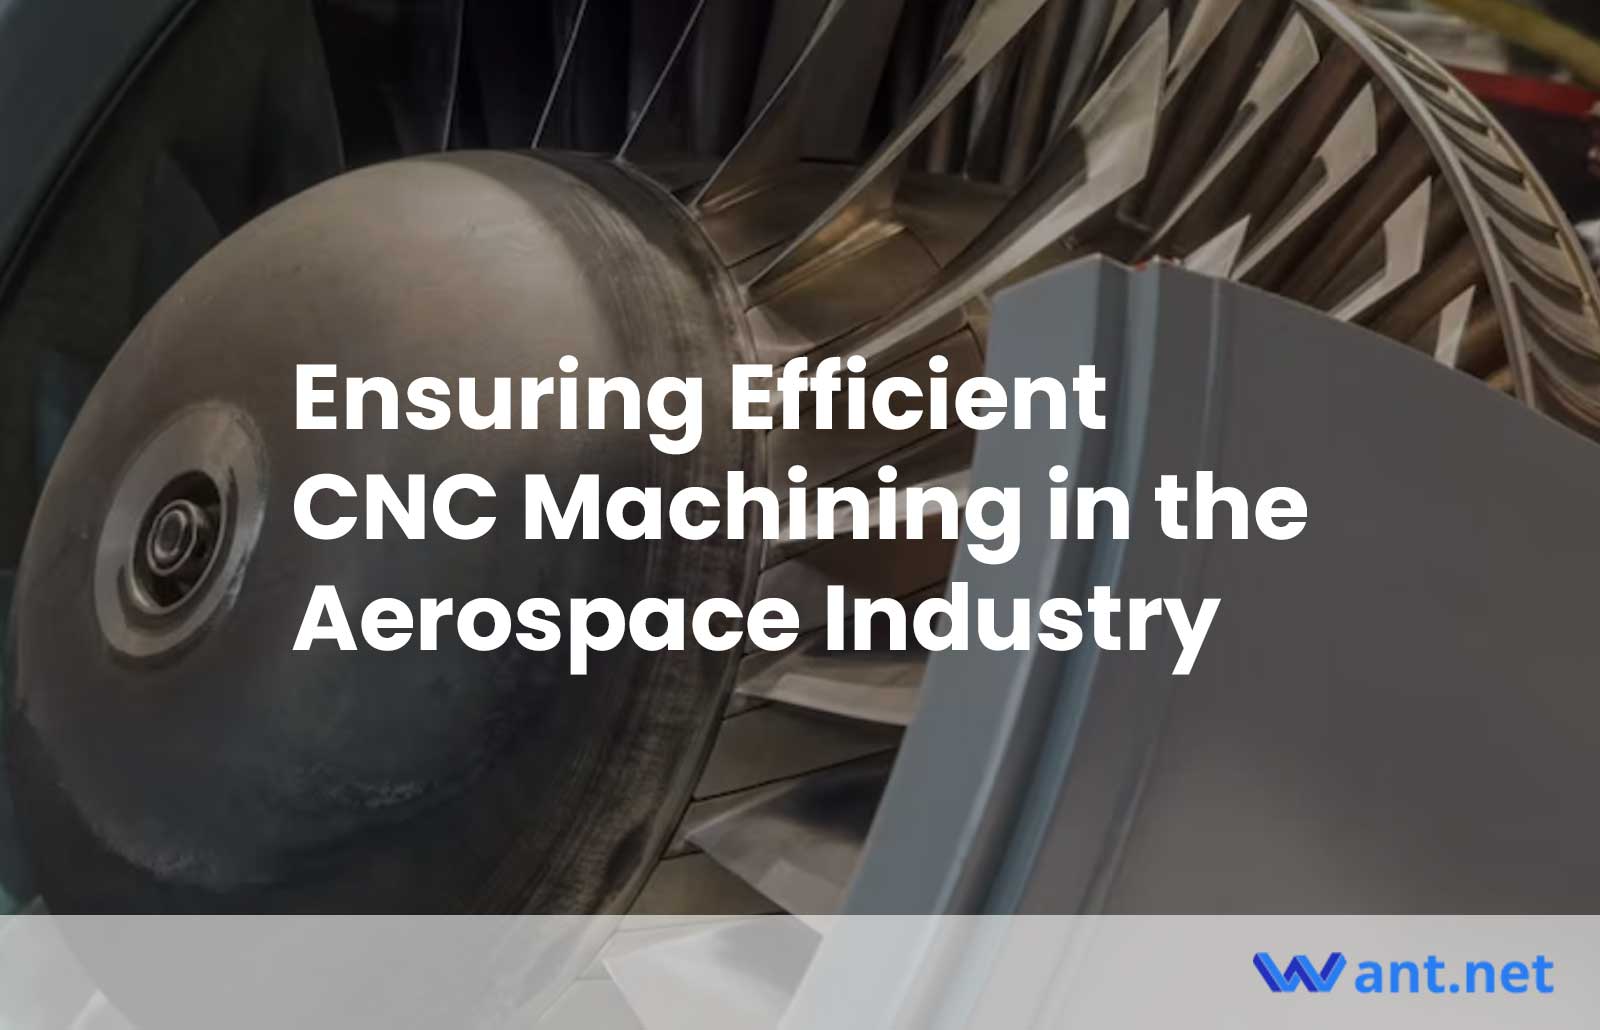 Ensuring Efficient CNC Machining in the Aerospace Industry